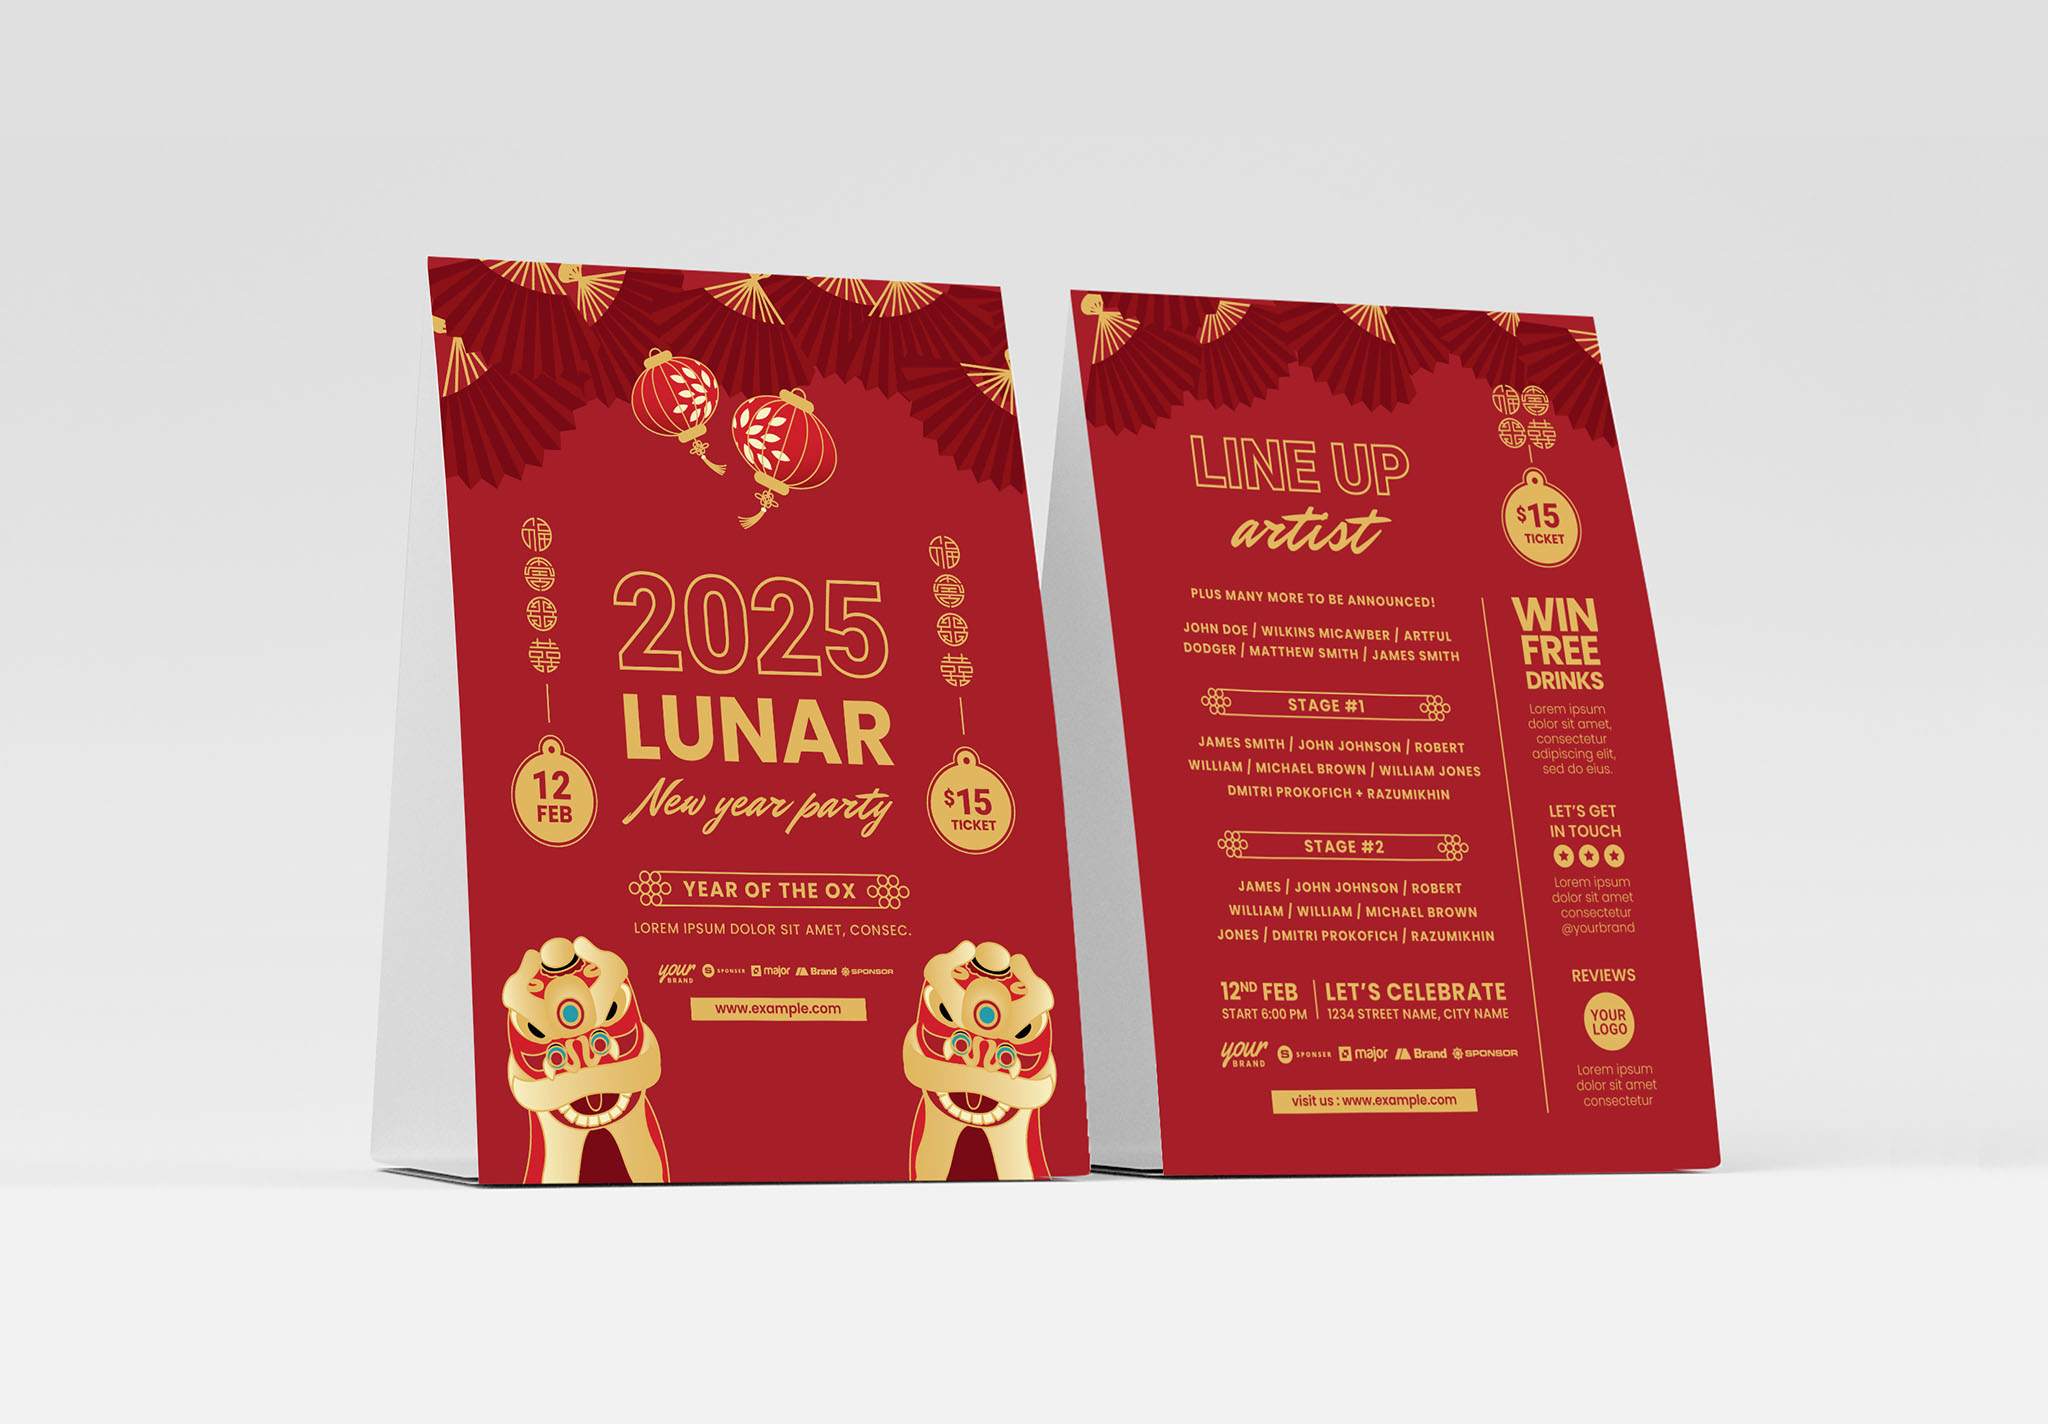 Red & Gold Chinese New Year Template in Vector / Ai / EPS / Illustrator Formats